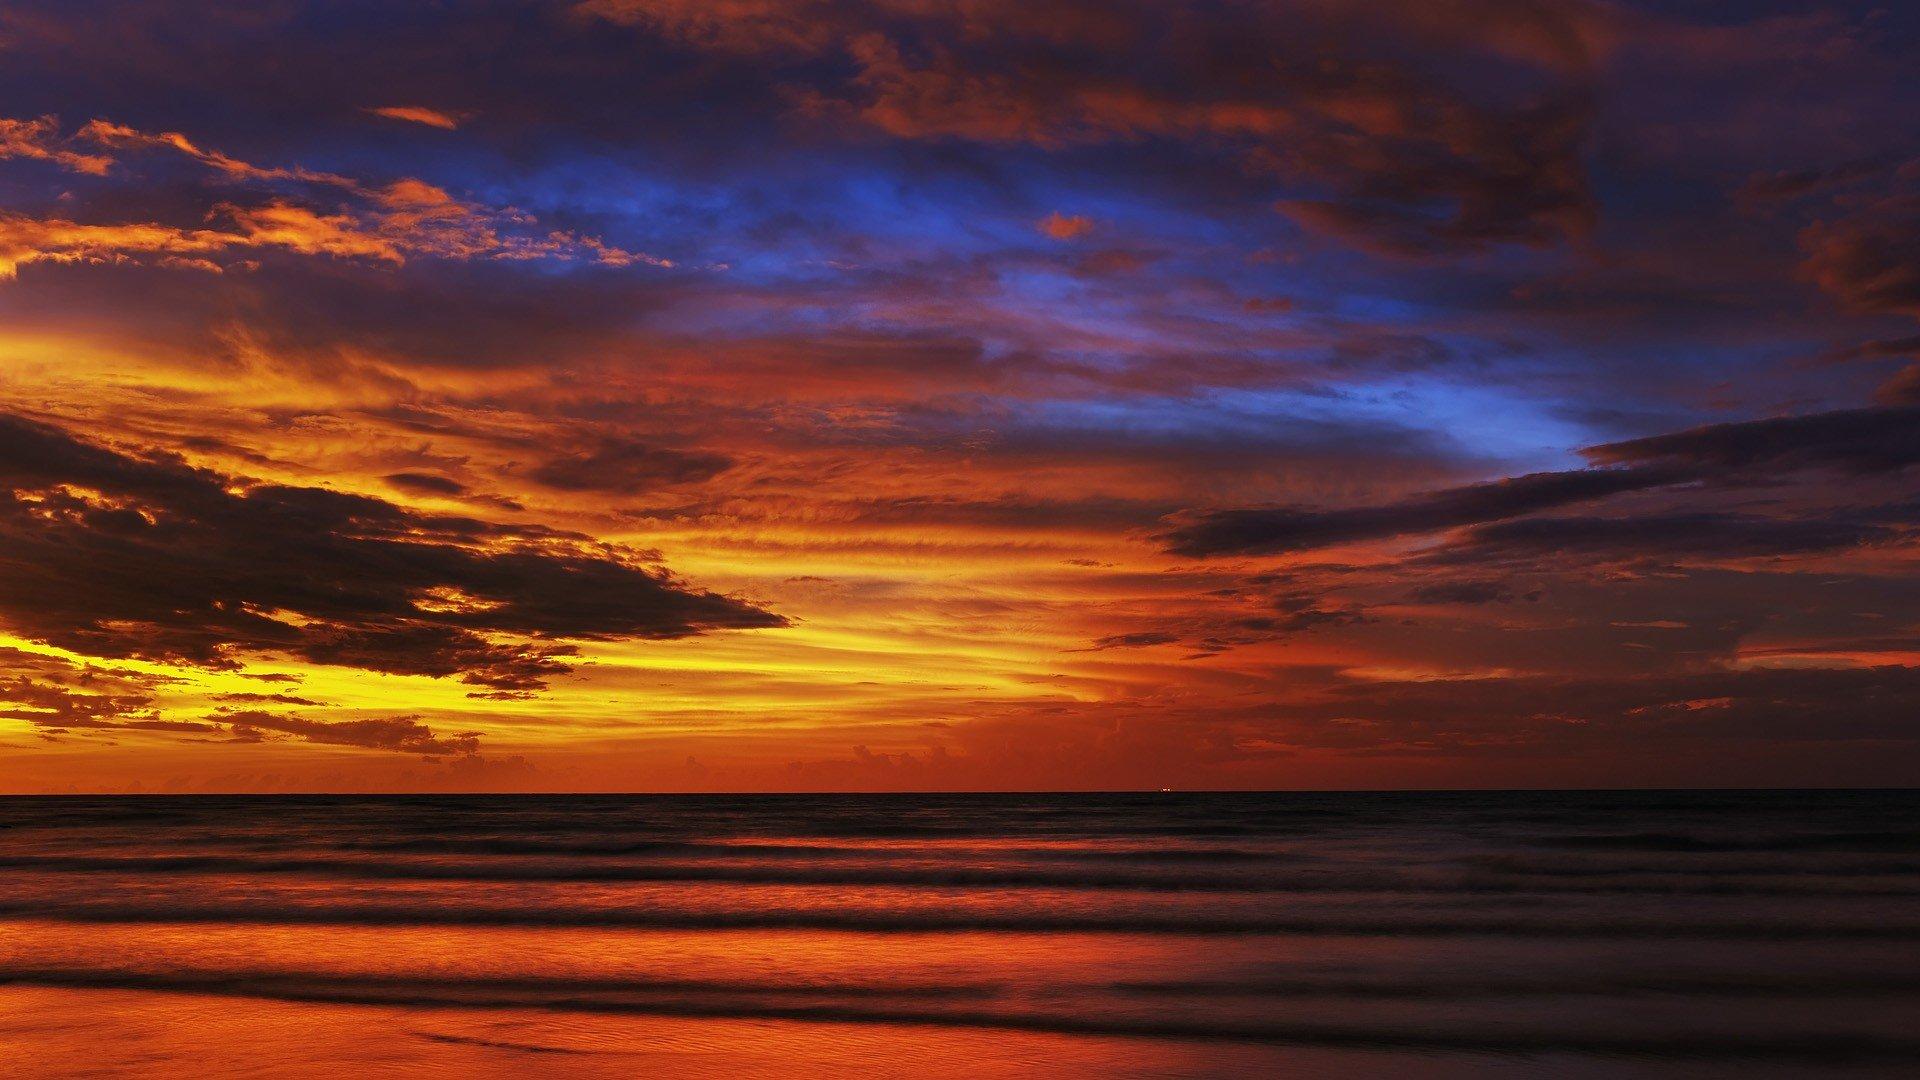 1920X1080 Hd Sunset Wallpapers - Top Free 1920X1080 Hd Sunset